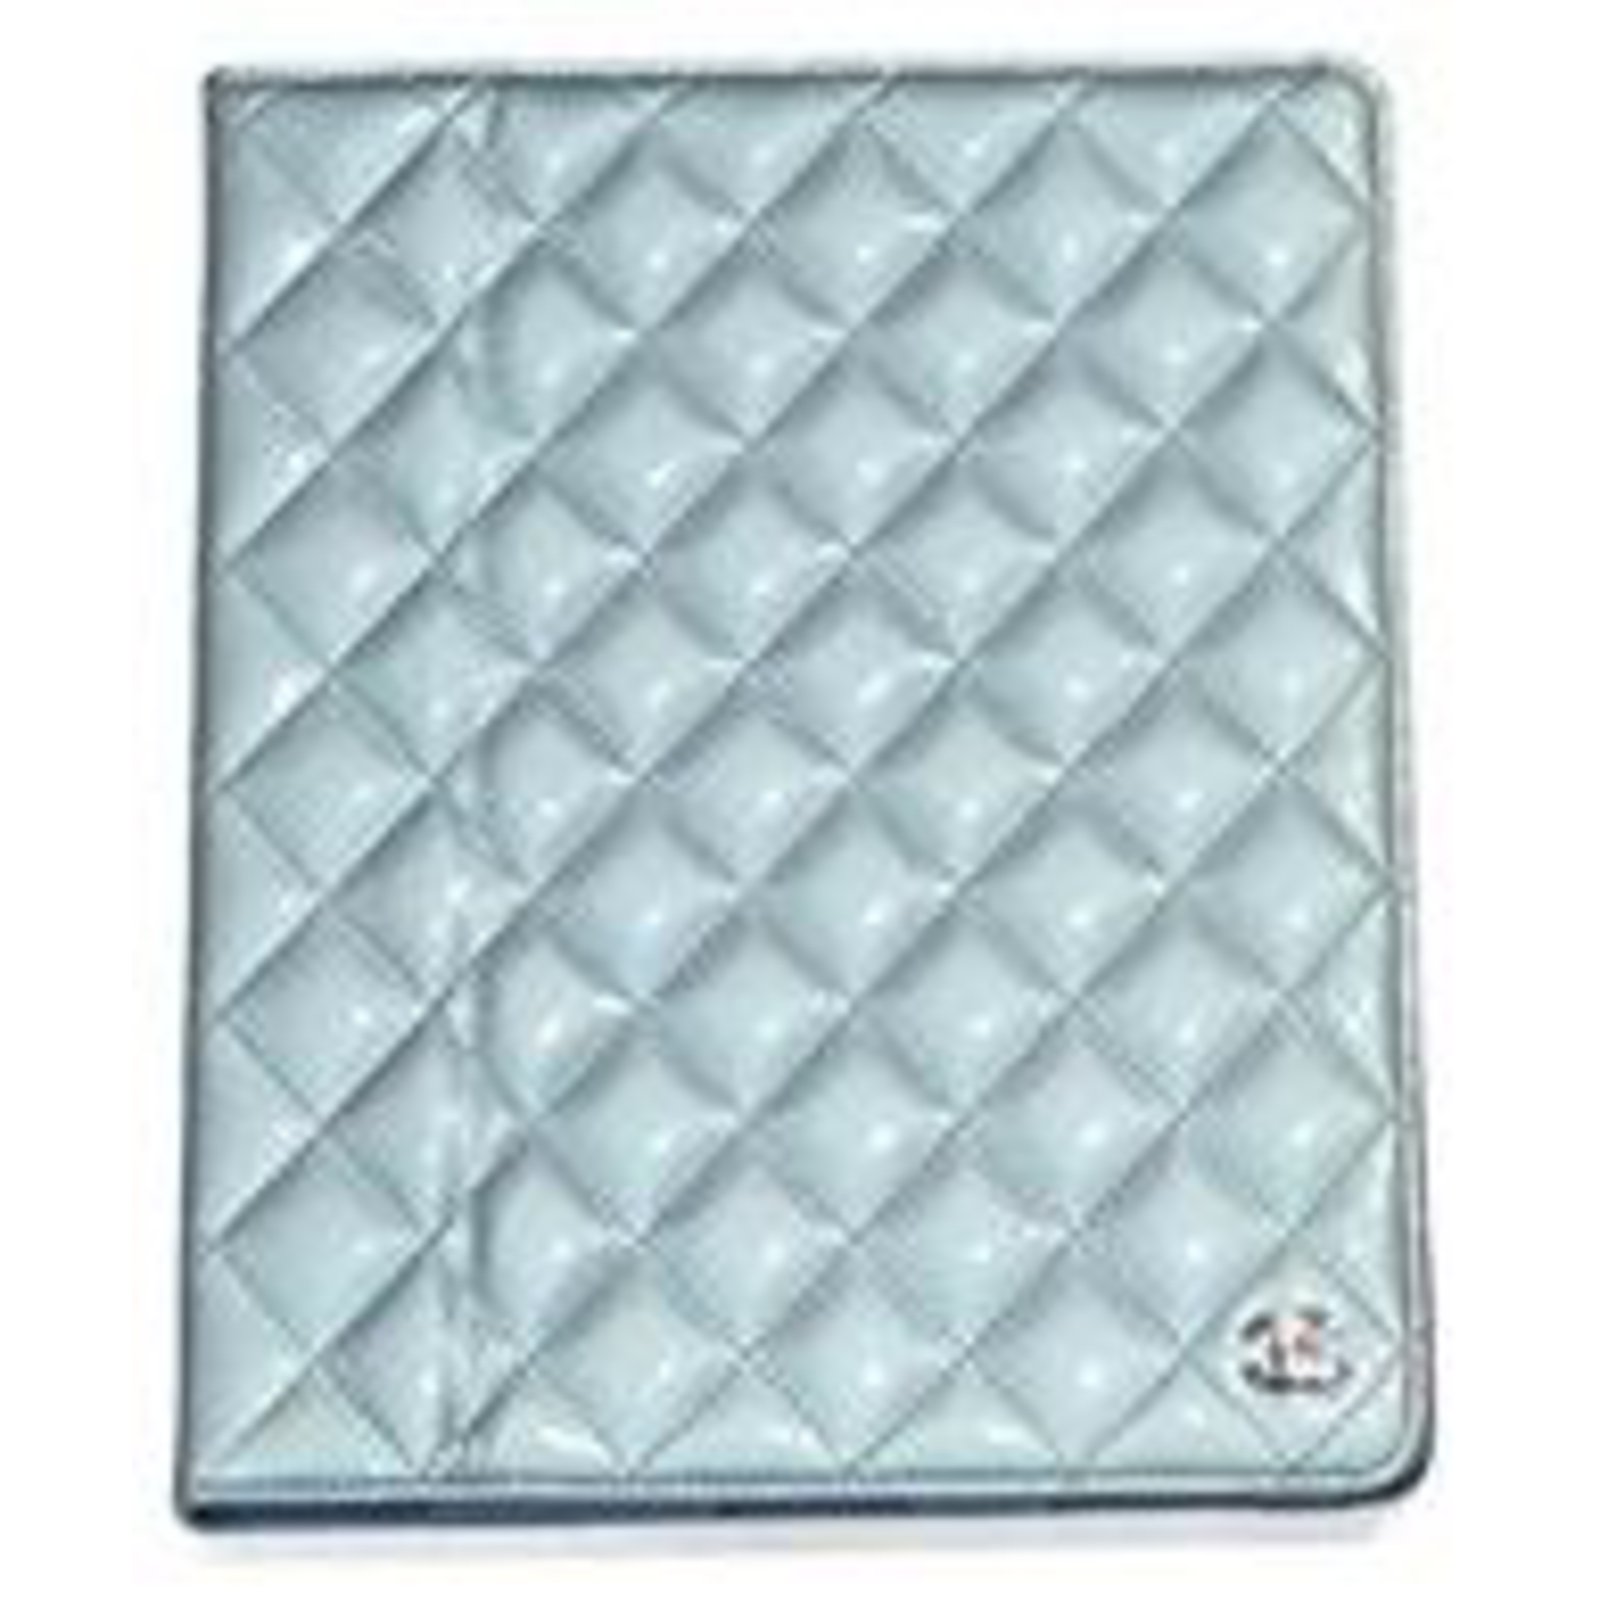 CHANEL IPAD PROTECTOR IN BLUE GRAY QUILTED PATENT LEATHER